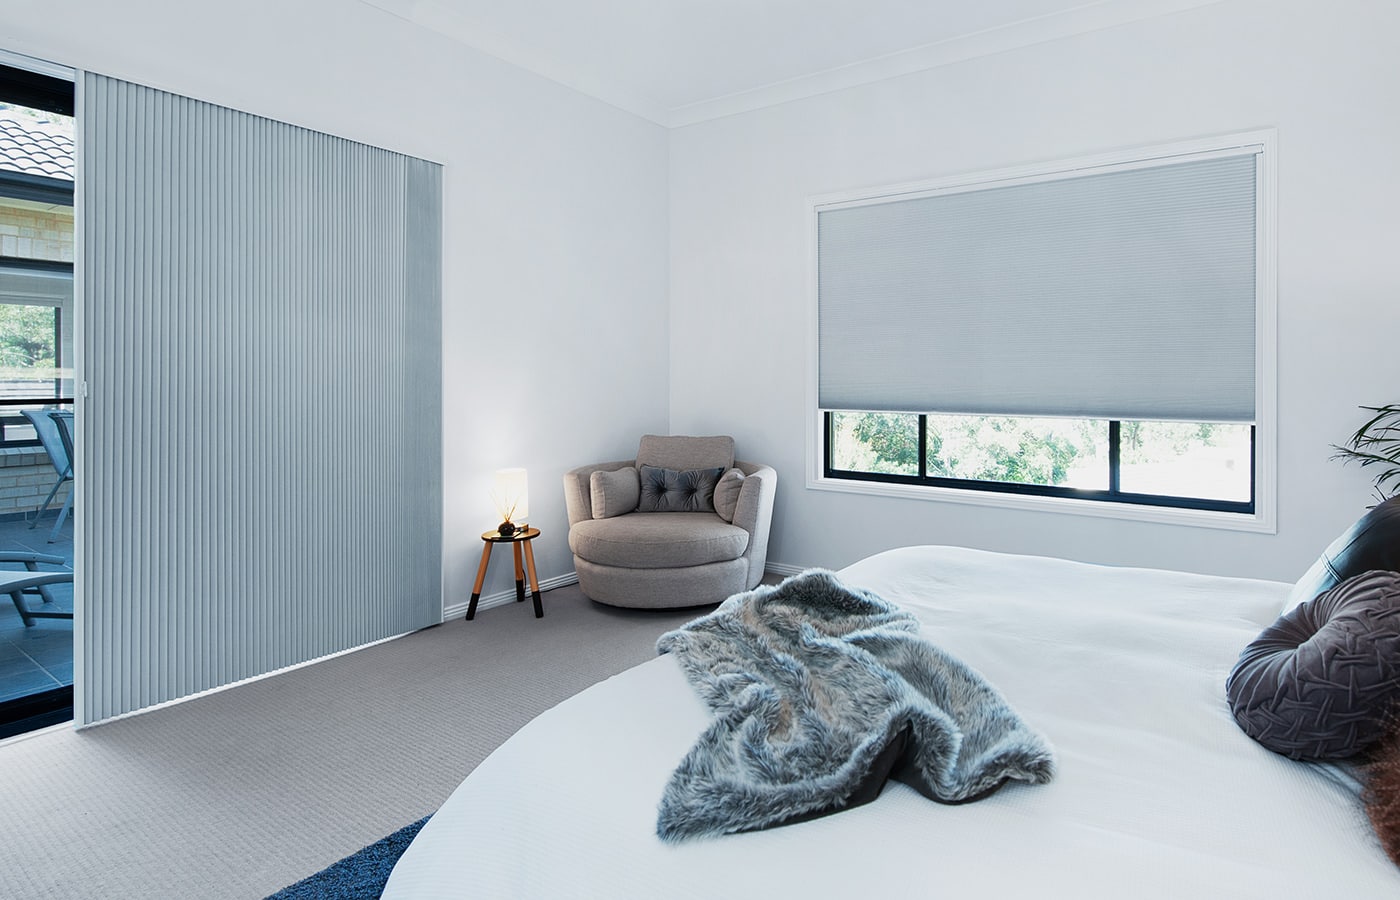 Elegant room with blueish tone and timeless furniture style, featuring Luxaflex award-winning design and industry-leading Honeycomb Shdes. Available in various styles, systems, and fabrics. For sale and on display in Complete Blinds Sydney showroom.